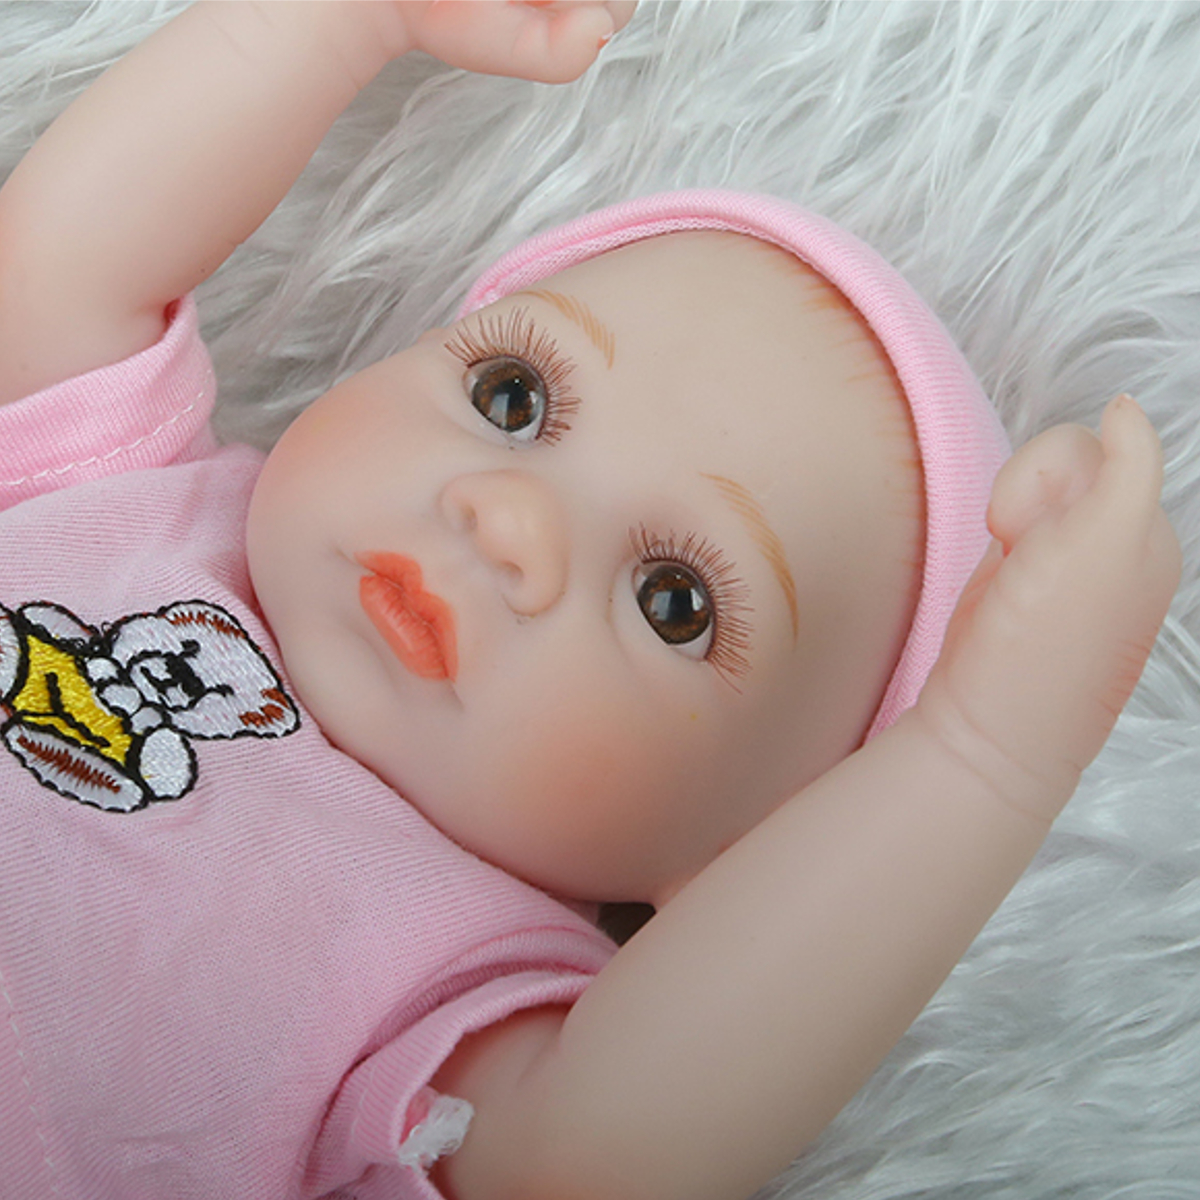 28CM-Silicone-Realistic-Sleeping-Reborns-Lifelike-Newborn-Baby-Doll-Toy-with-Moveable-Head-Arms-And--1817558-10